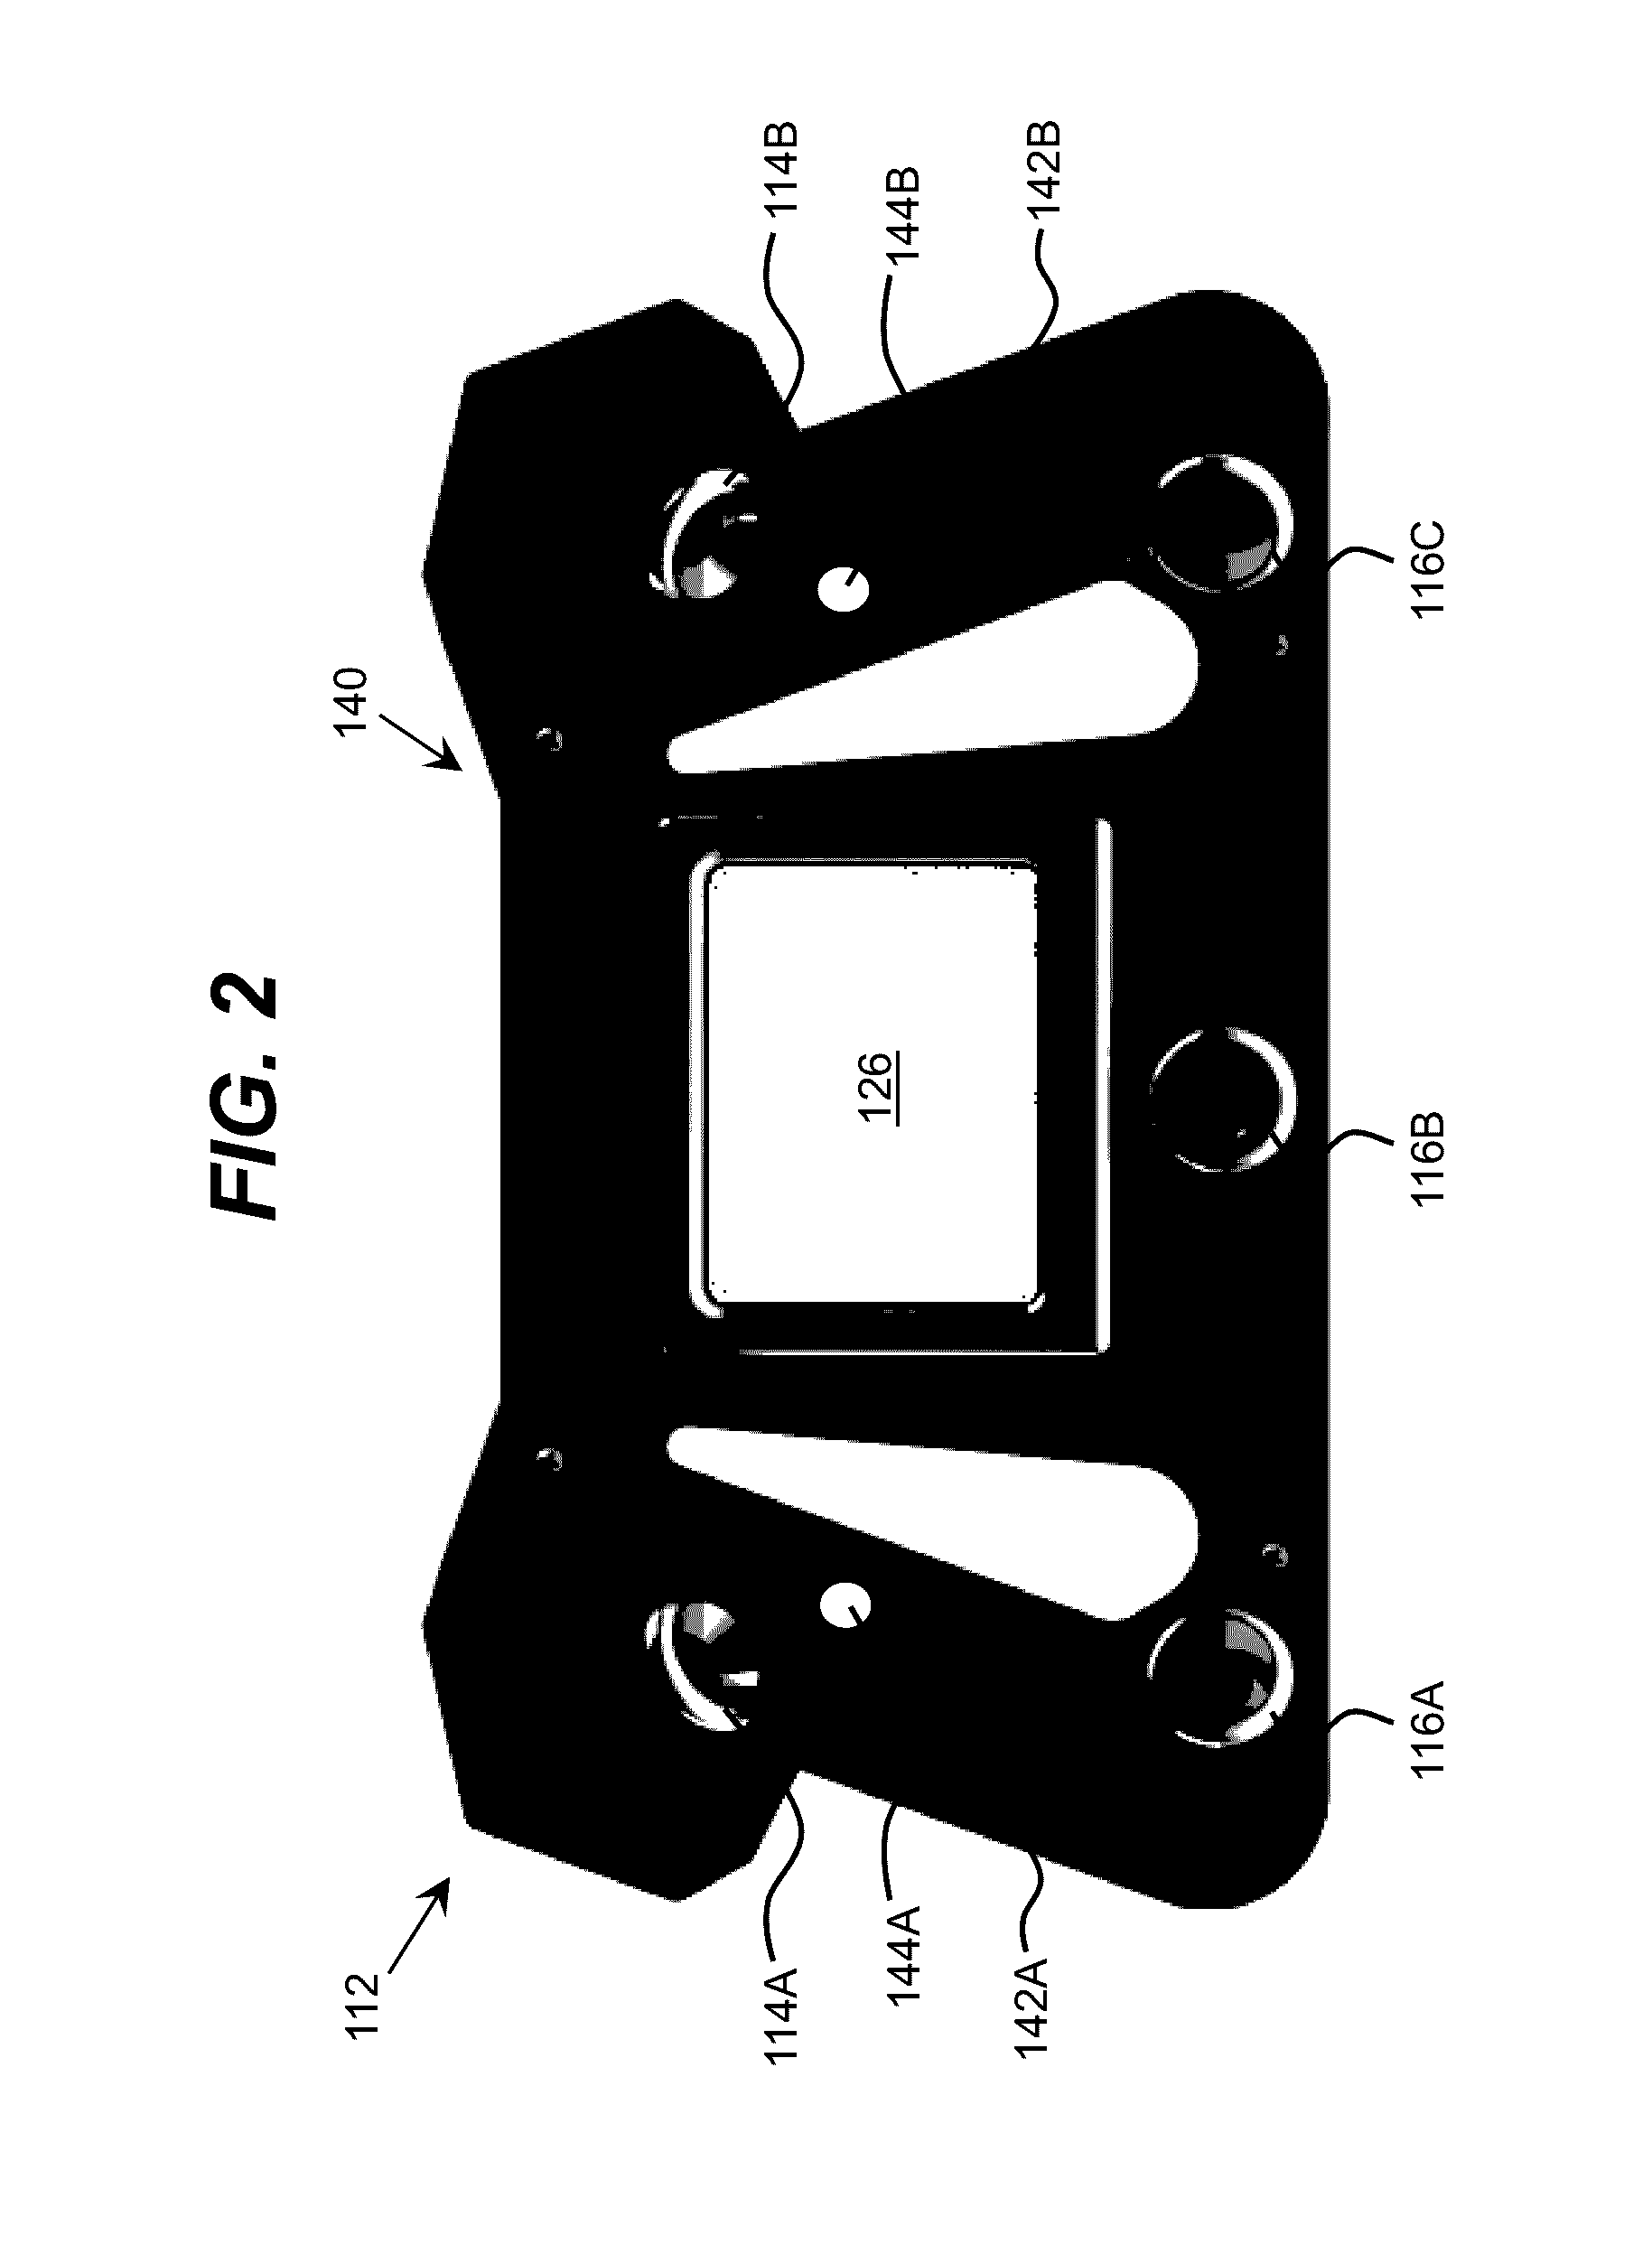 Noncontact measuring device